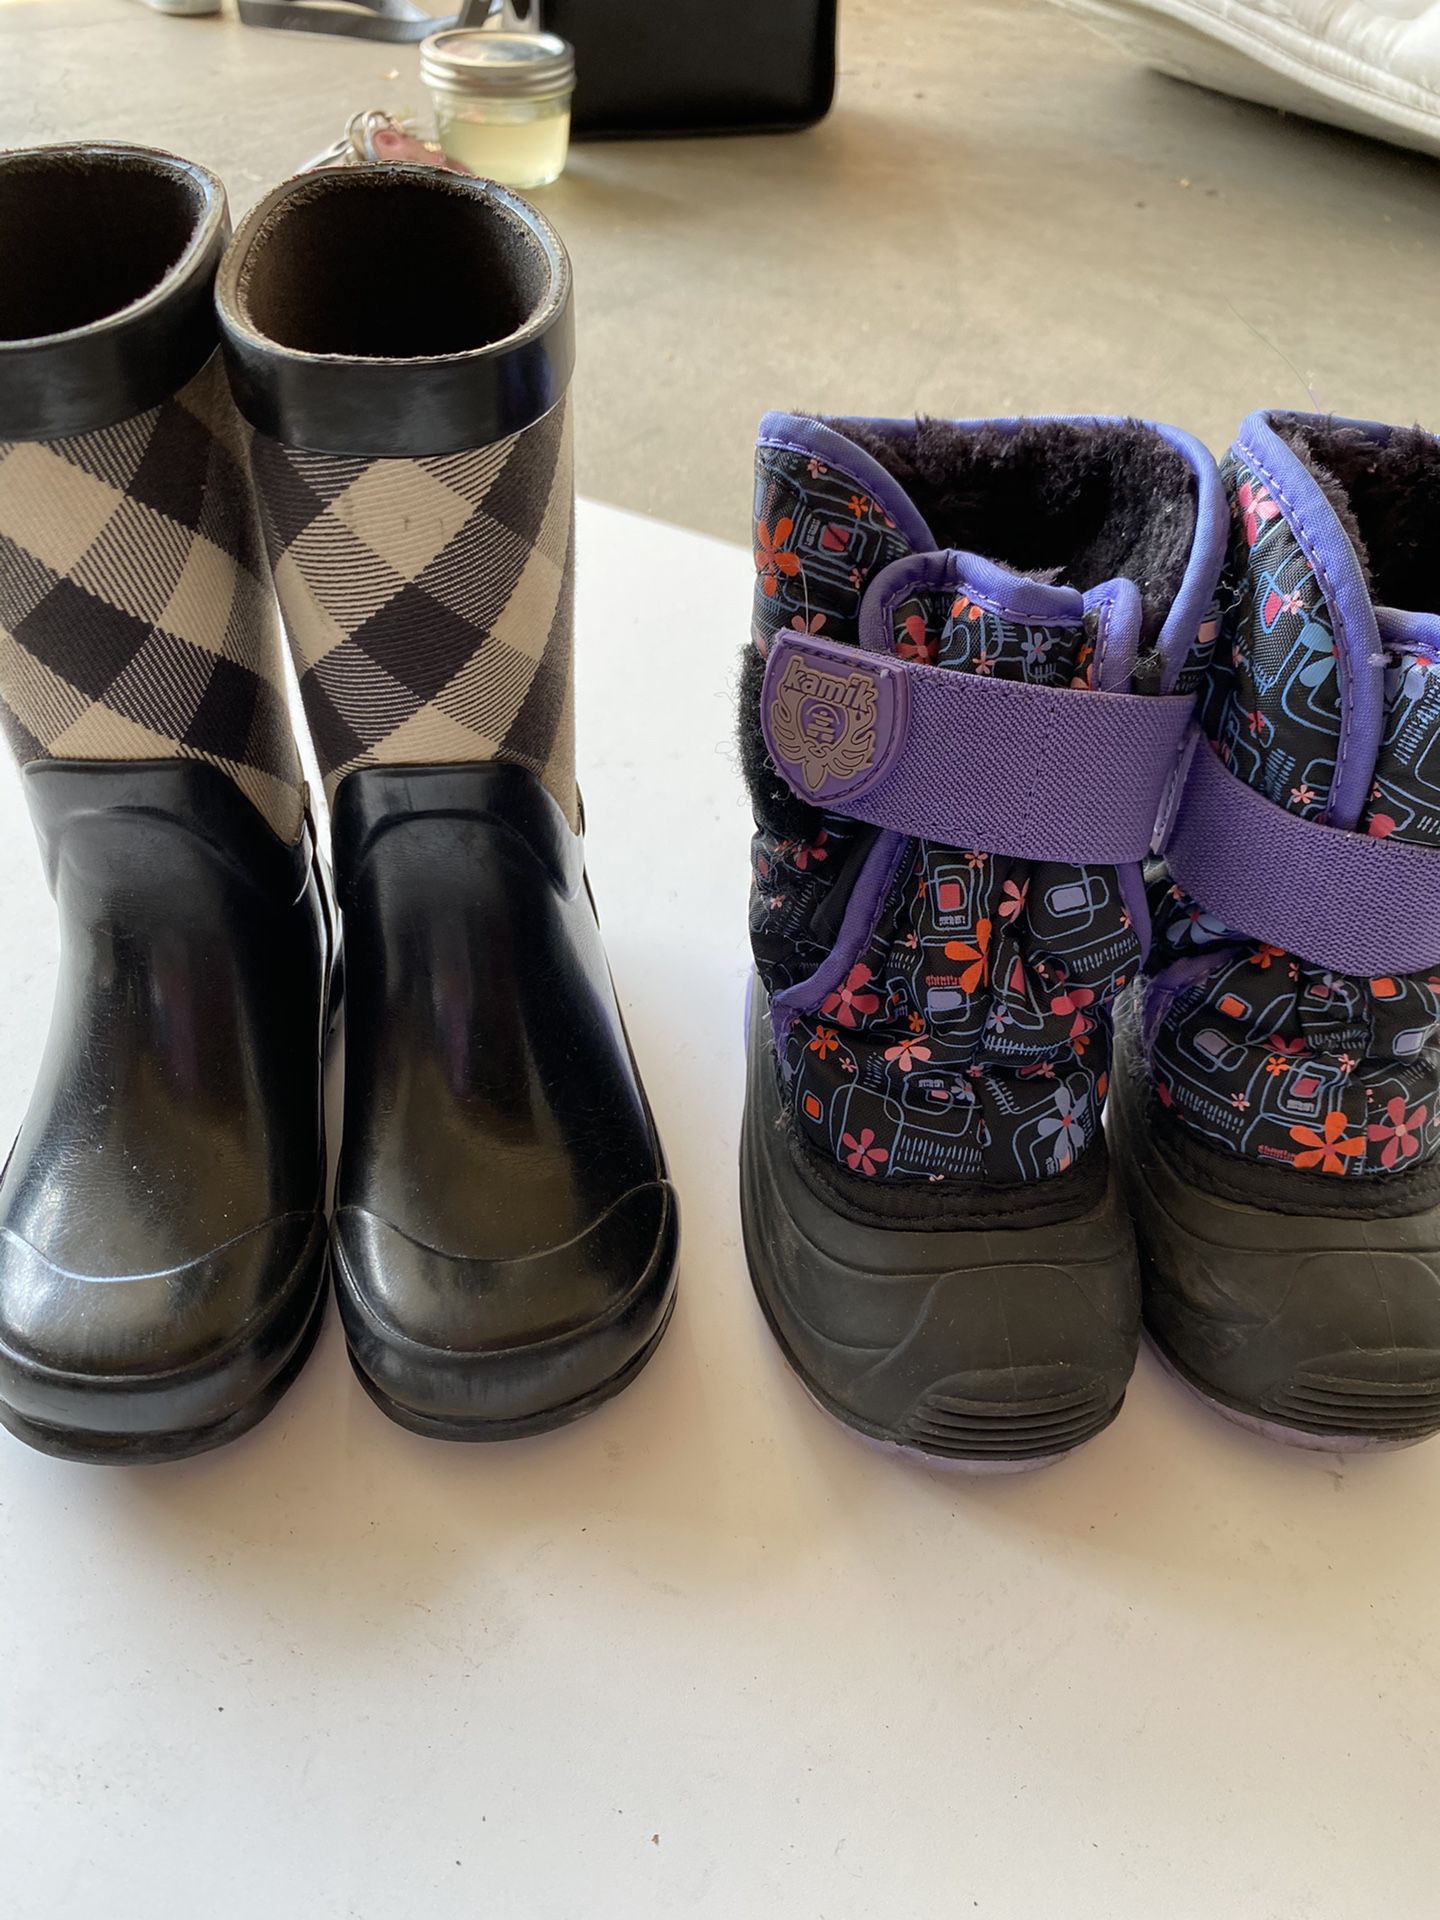 Toddler Girl’s Size 7 Burberry rain boots and size 6 Northside Snow boots